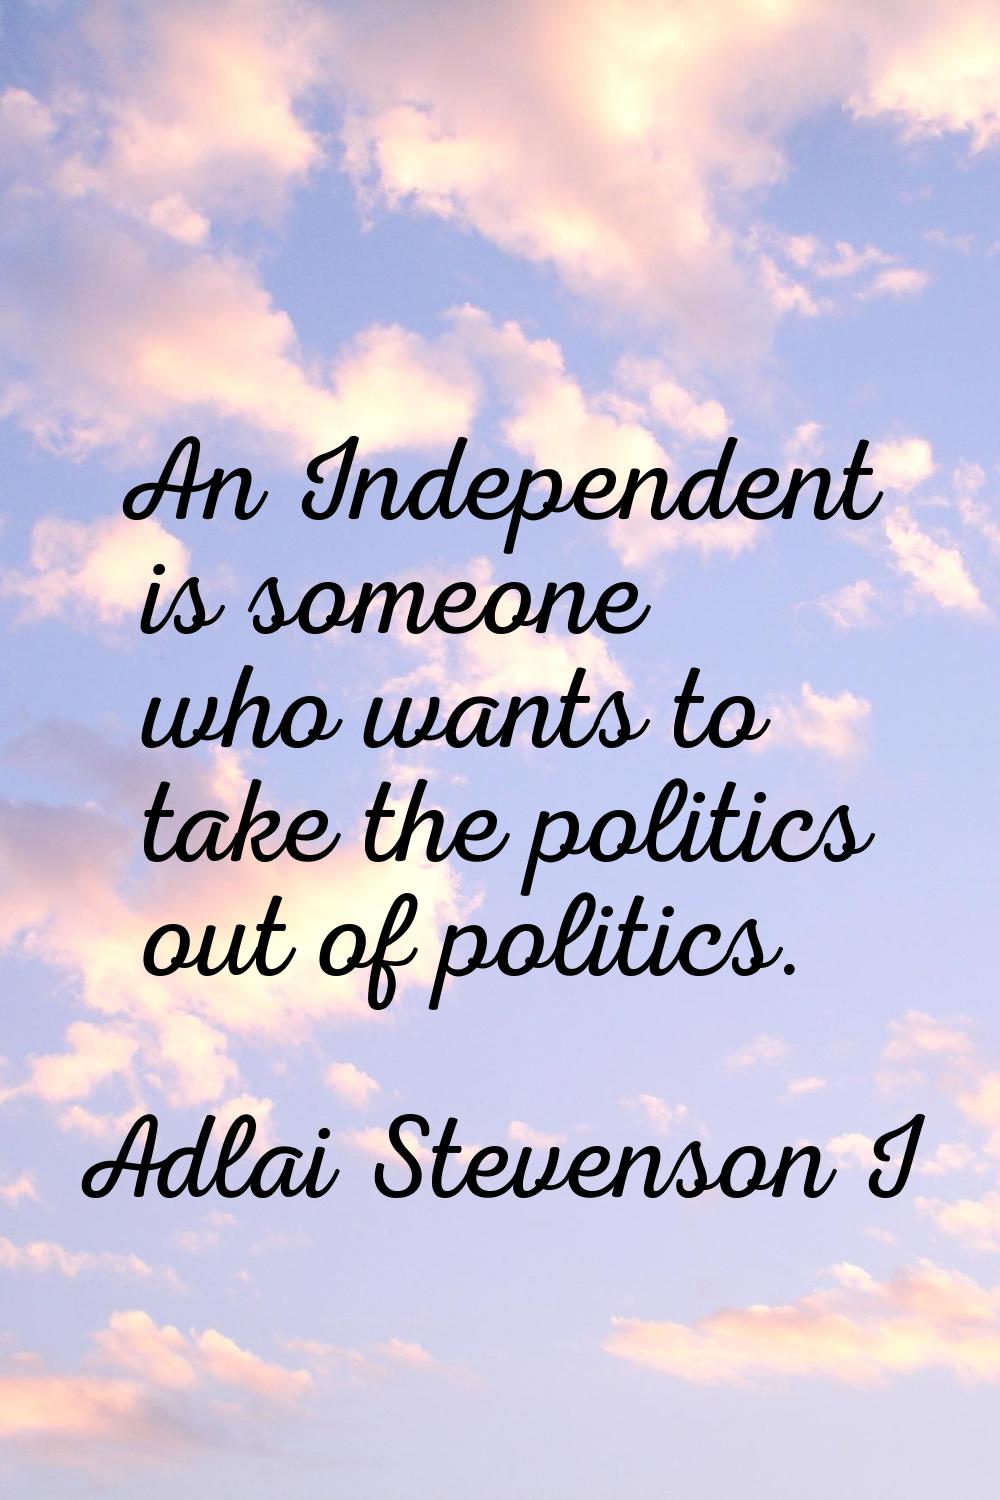 An Independent is someone who wants to take the politics out of politics.